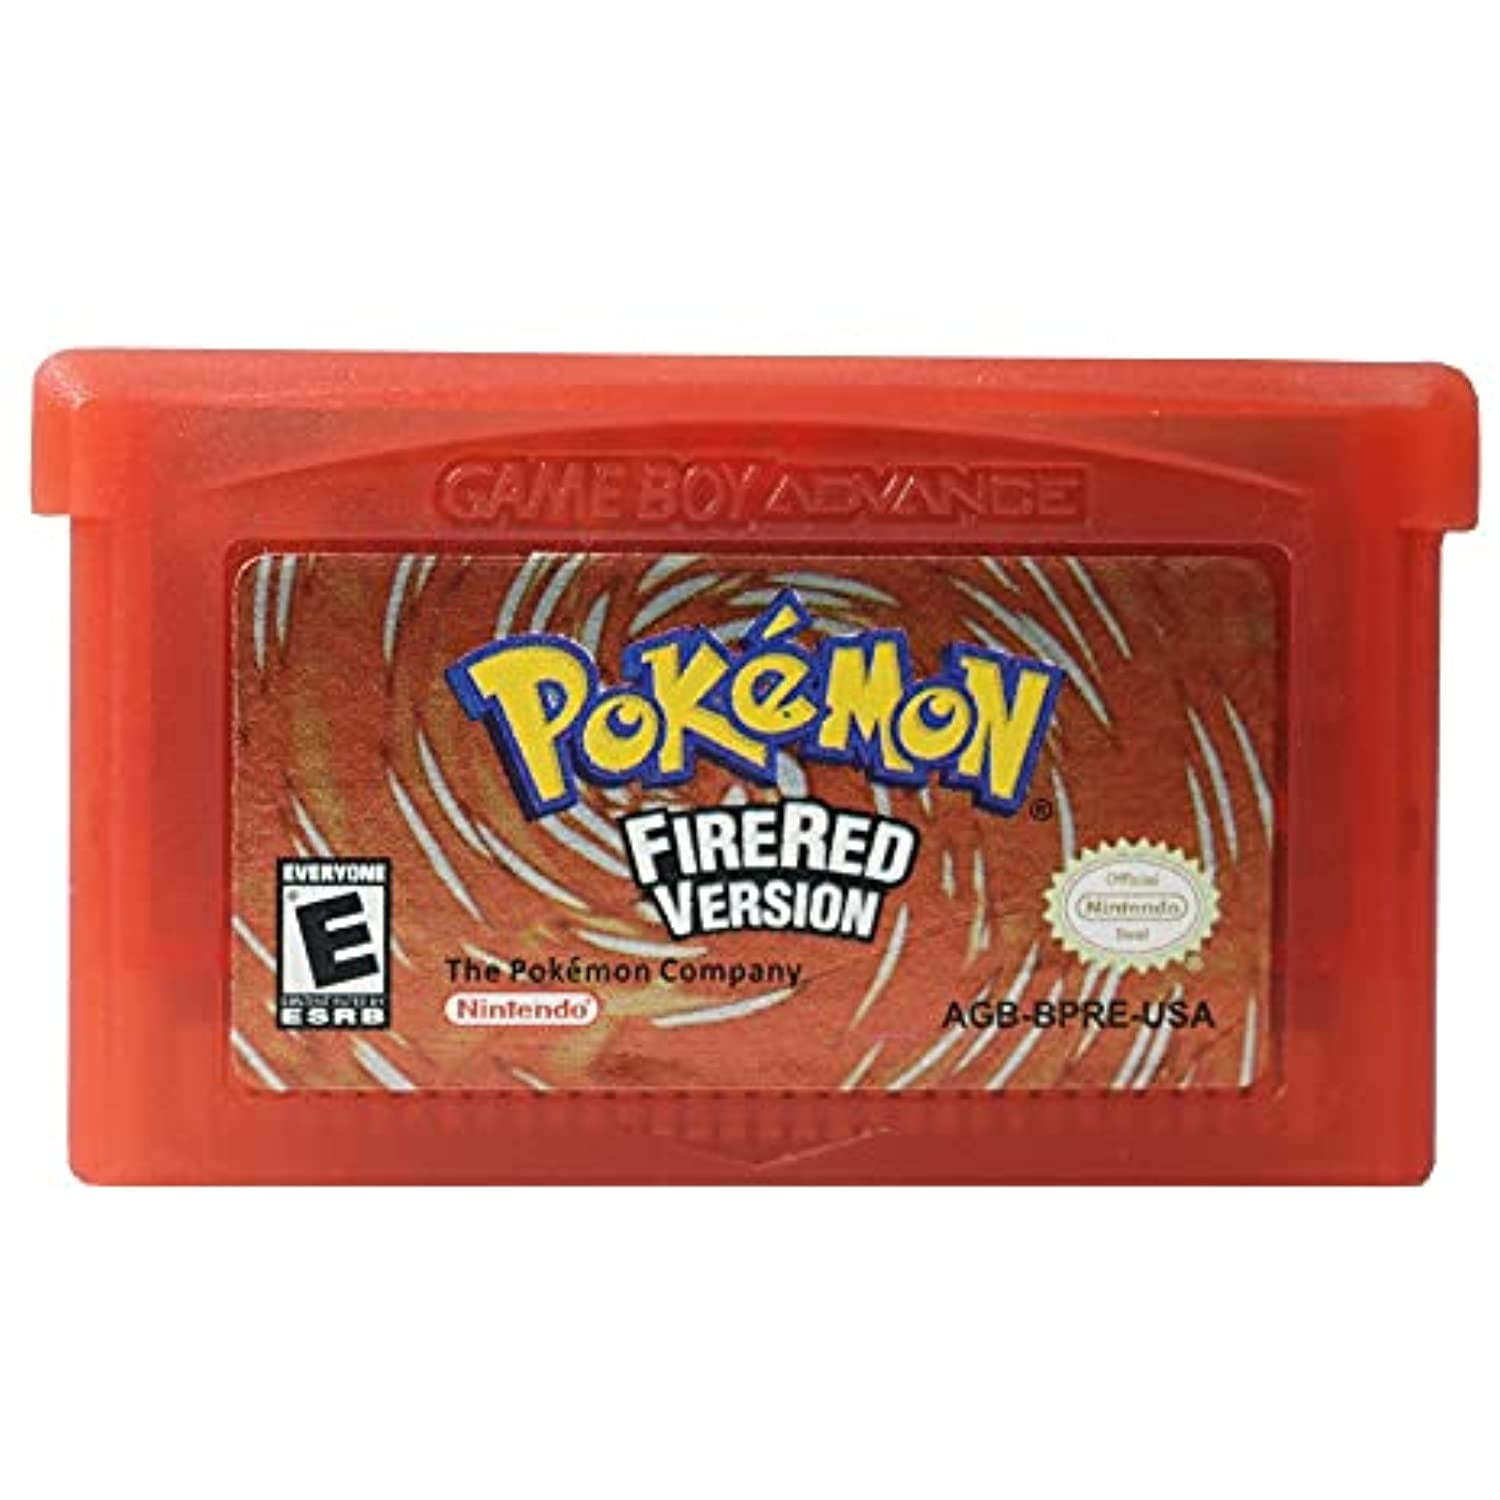 SGC Pokemon Fire Red Version Game Cartridge Card for Nintendo Gameboy Advance | Canada